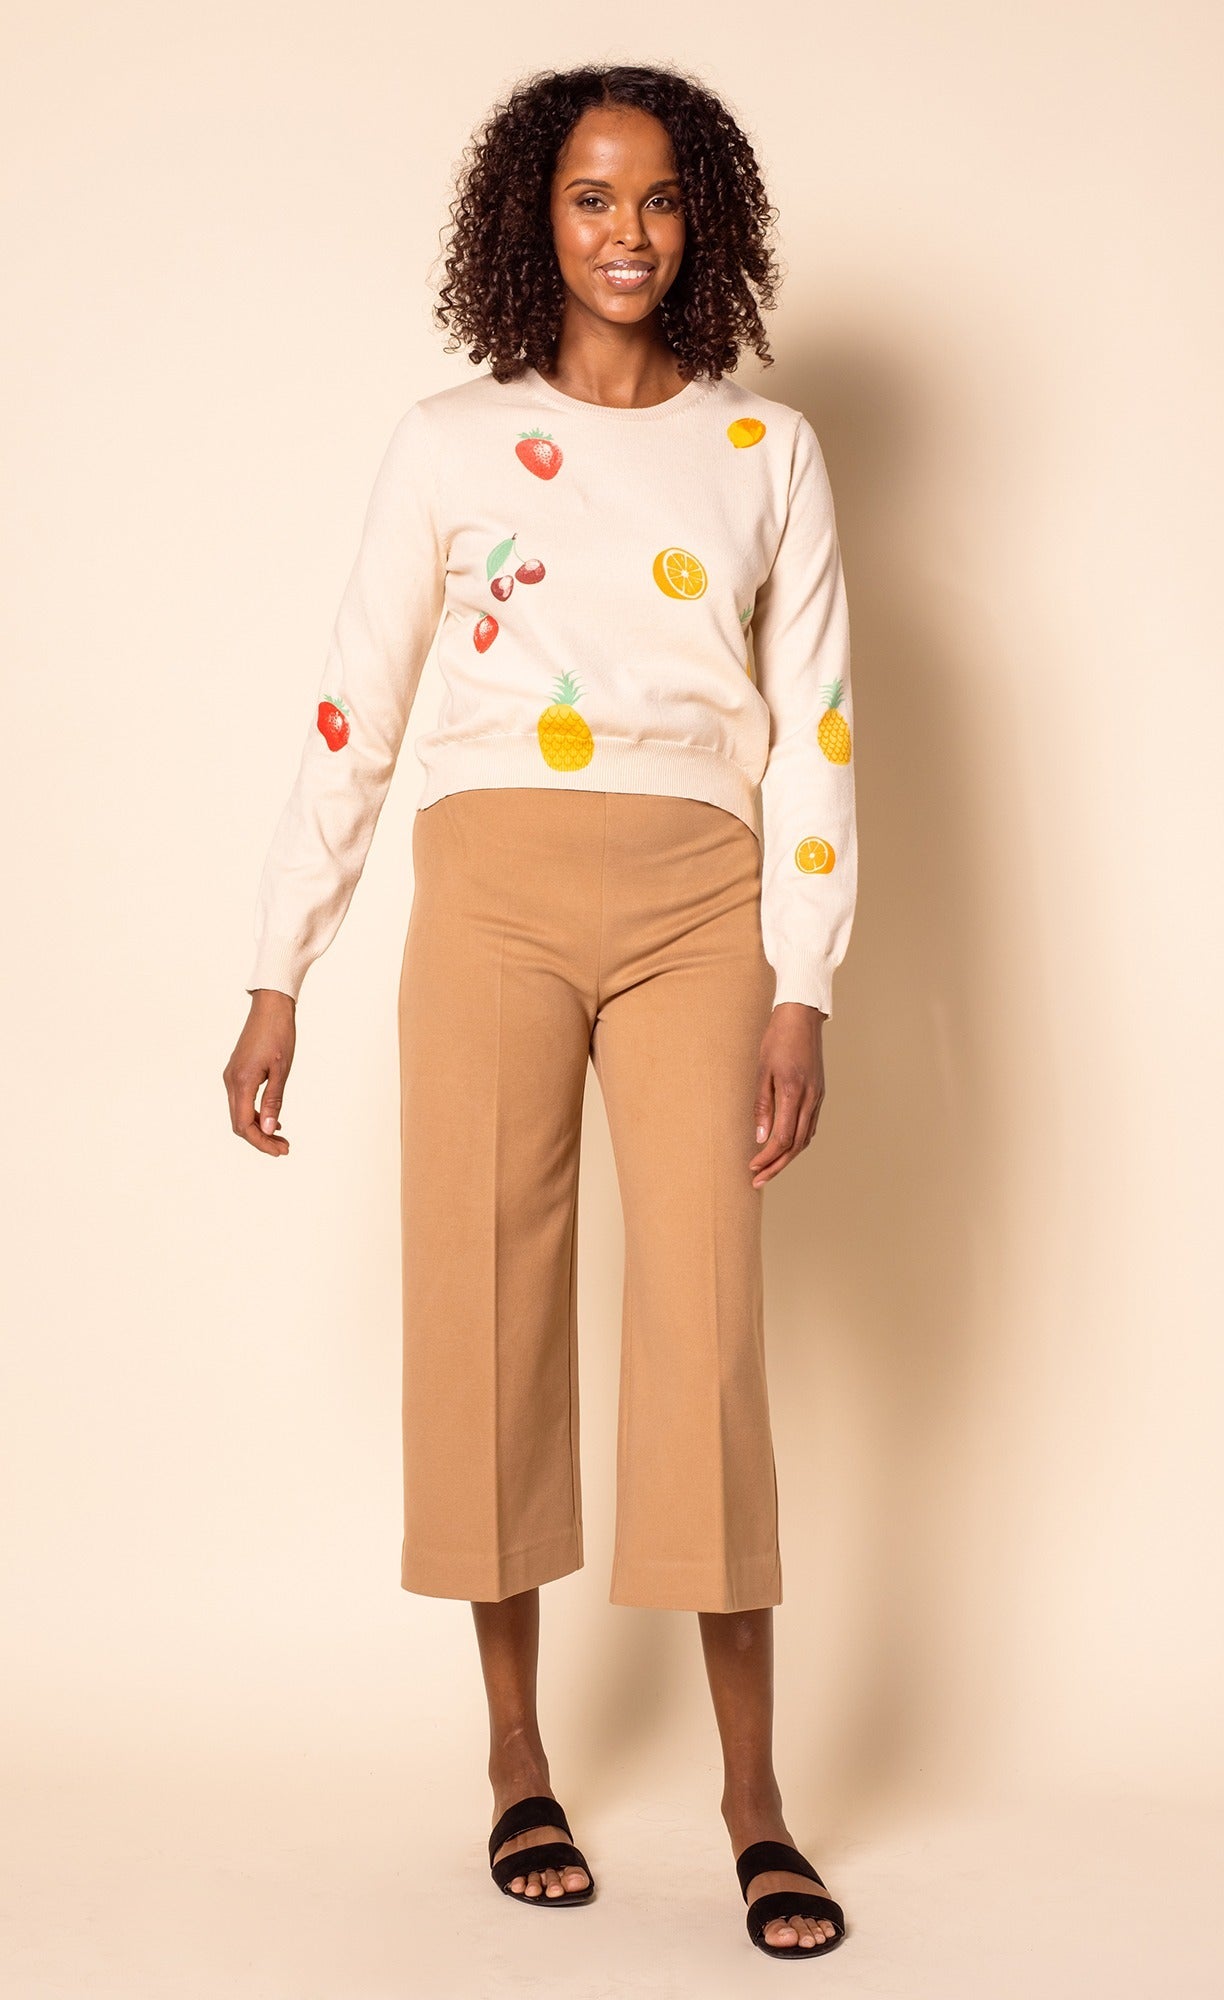 The Fruit Salad Sweater - Pink Martini Collection